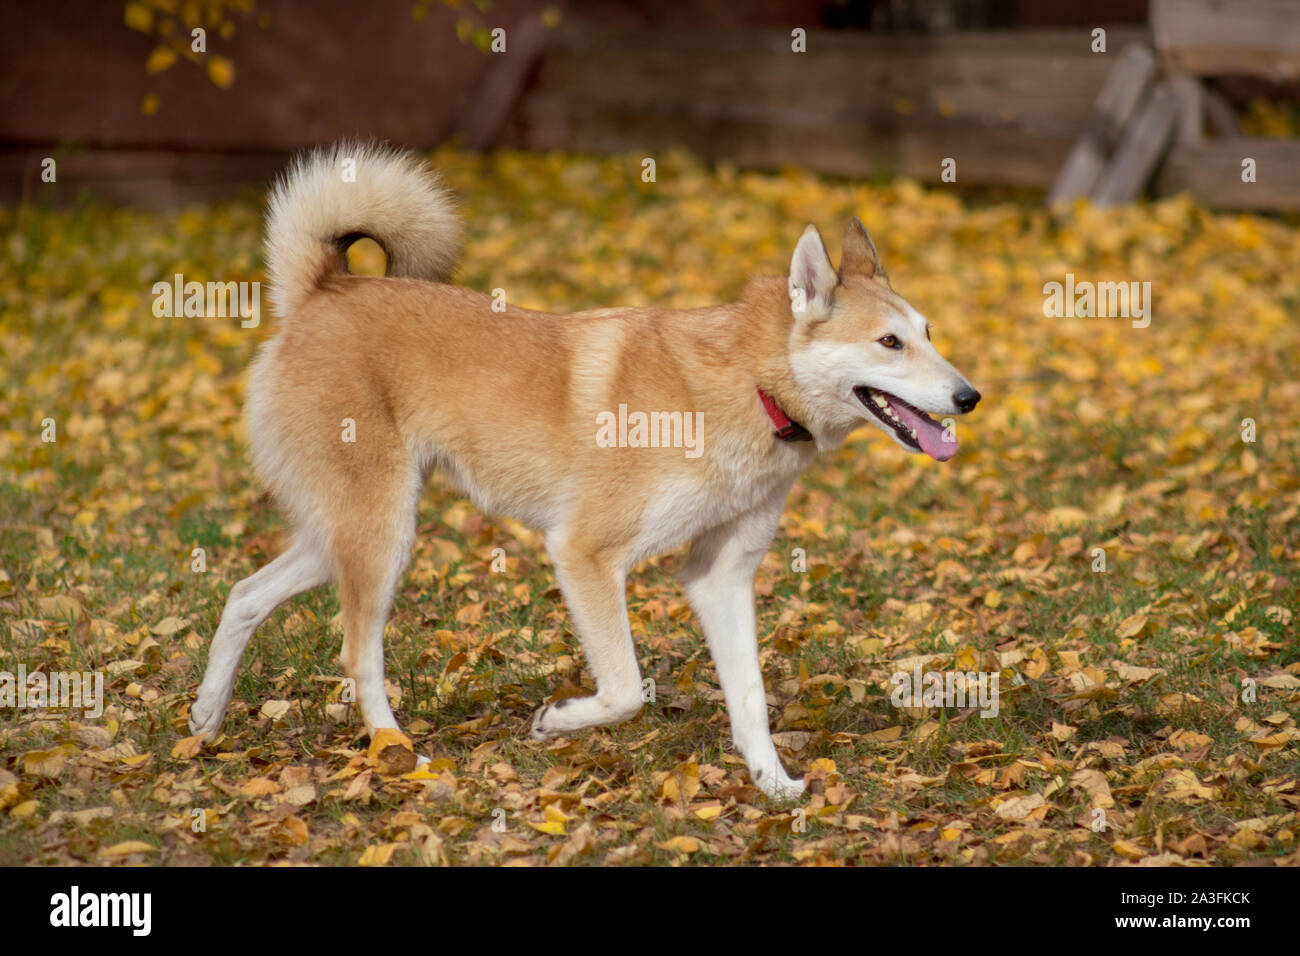 Cute West Siberian Laika Is Running On A Grass In The Autumn Park Pet Animals Purebred Dog Stock Photo Alamy